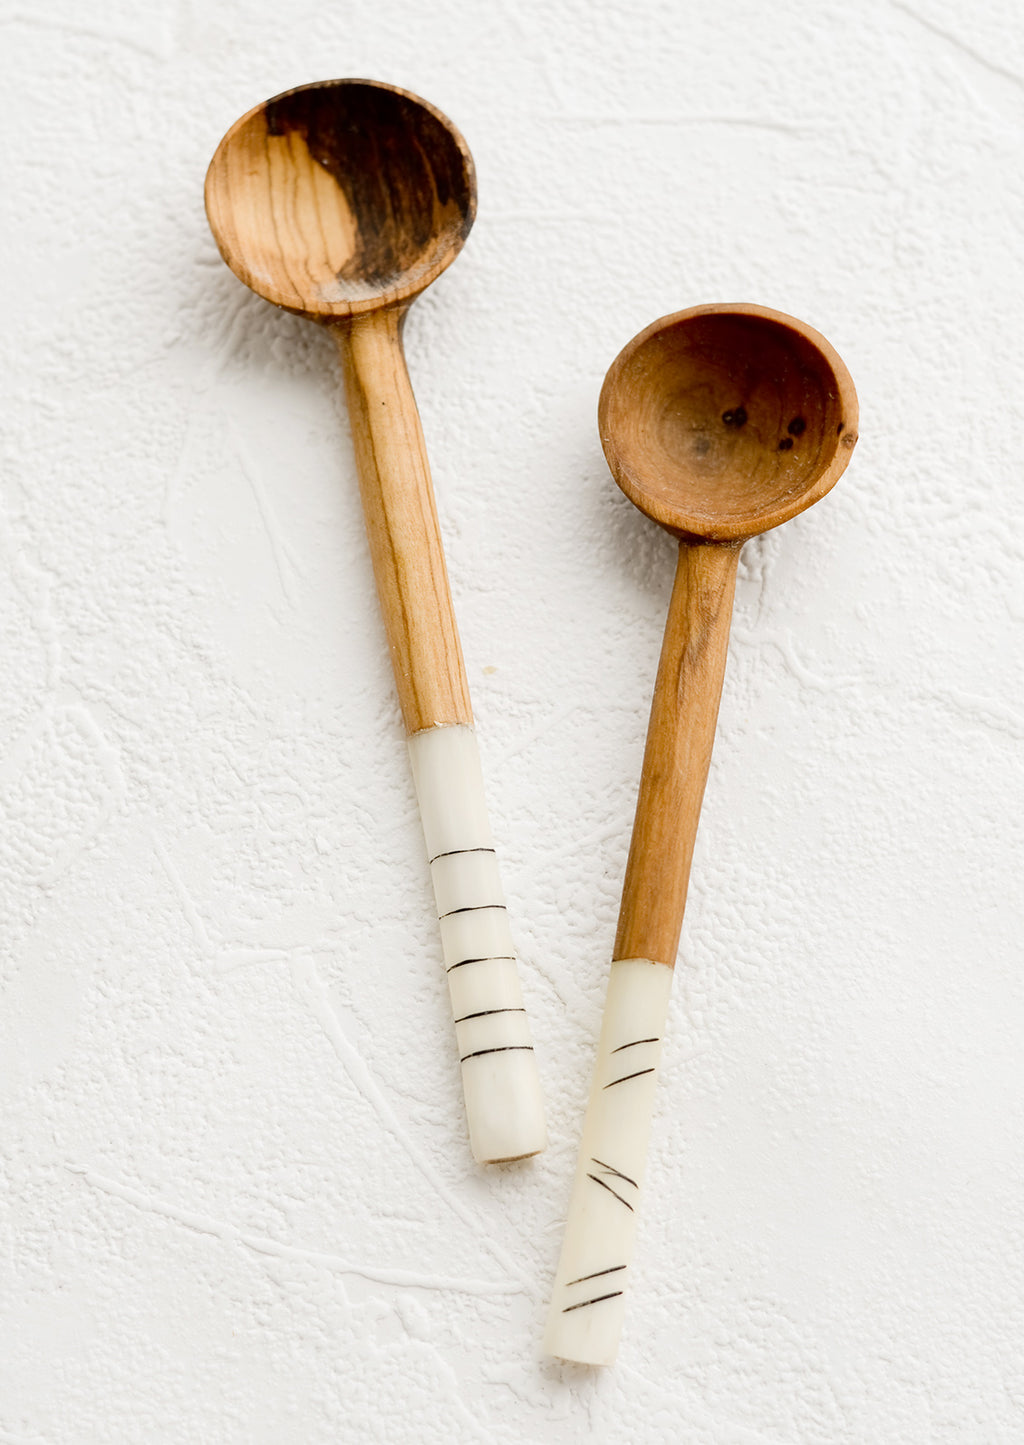 Ivory / Black Etched: Olivewood coffee scoops with ivory and black etched bone detailing on handles.